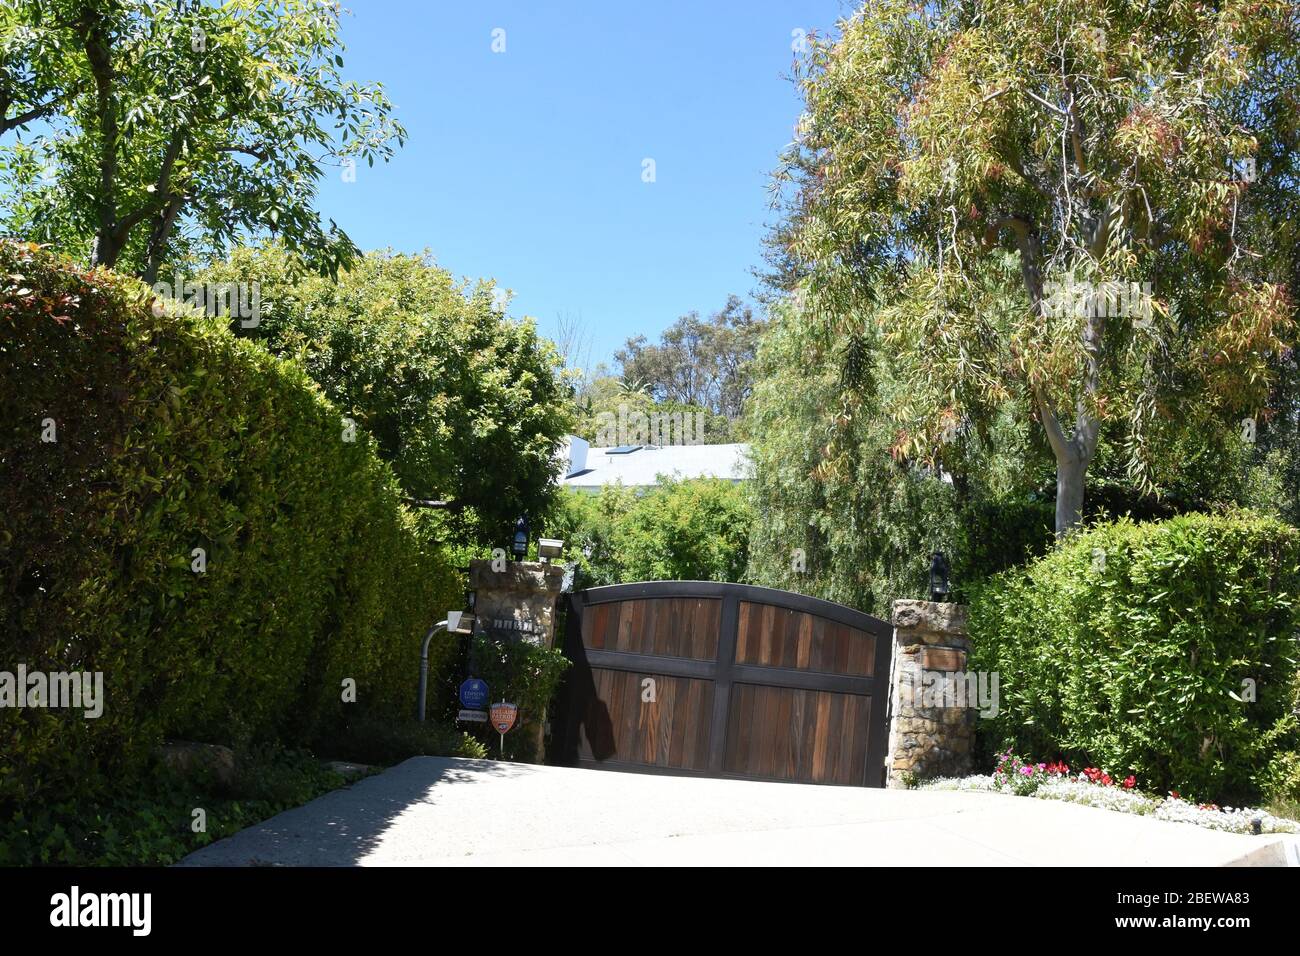 Beverly Hills, California, USA 15th April 2020 A general view of atmosphere of Jay Leno's home at 1151 Tower Drive in Beverly Hills, California, USA. Photo by Barry King/Alamy Stock Photo Stock Photo